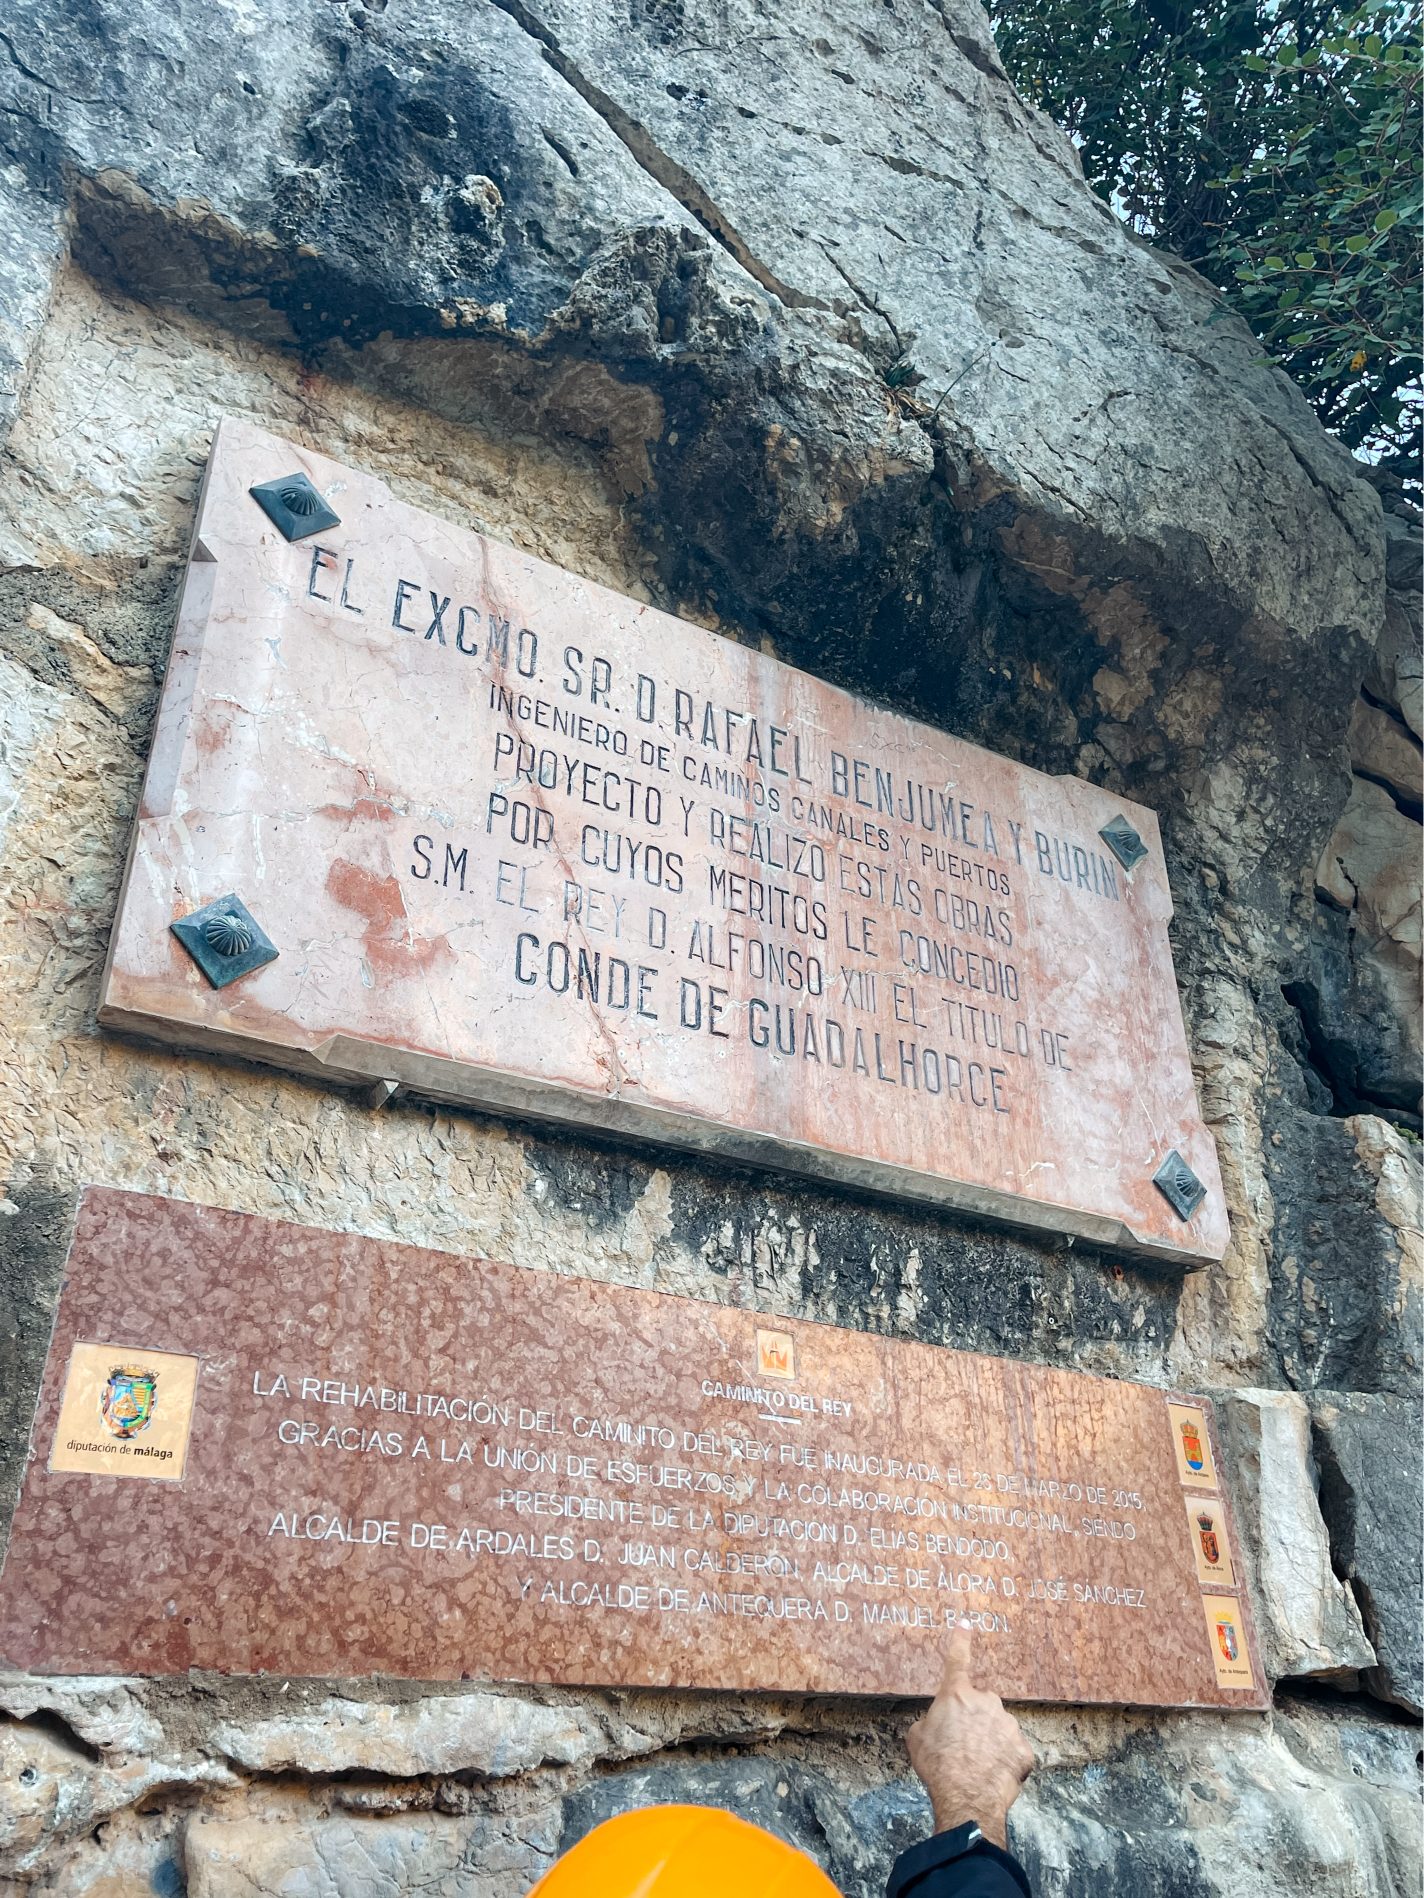 Commemorative plaques about the history right at the beginning of trail at el caminito del rey in malaga, spain